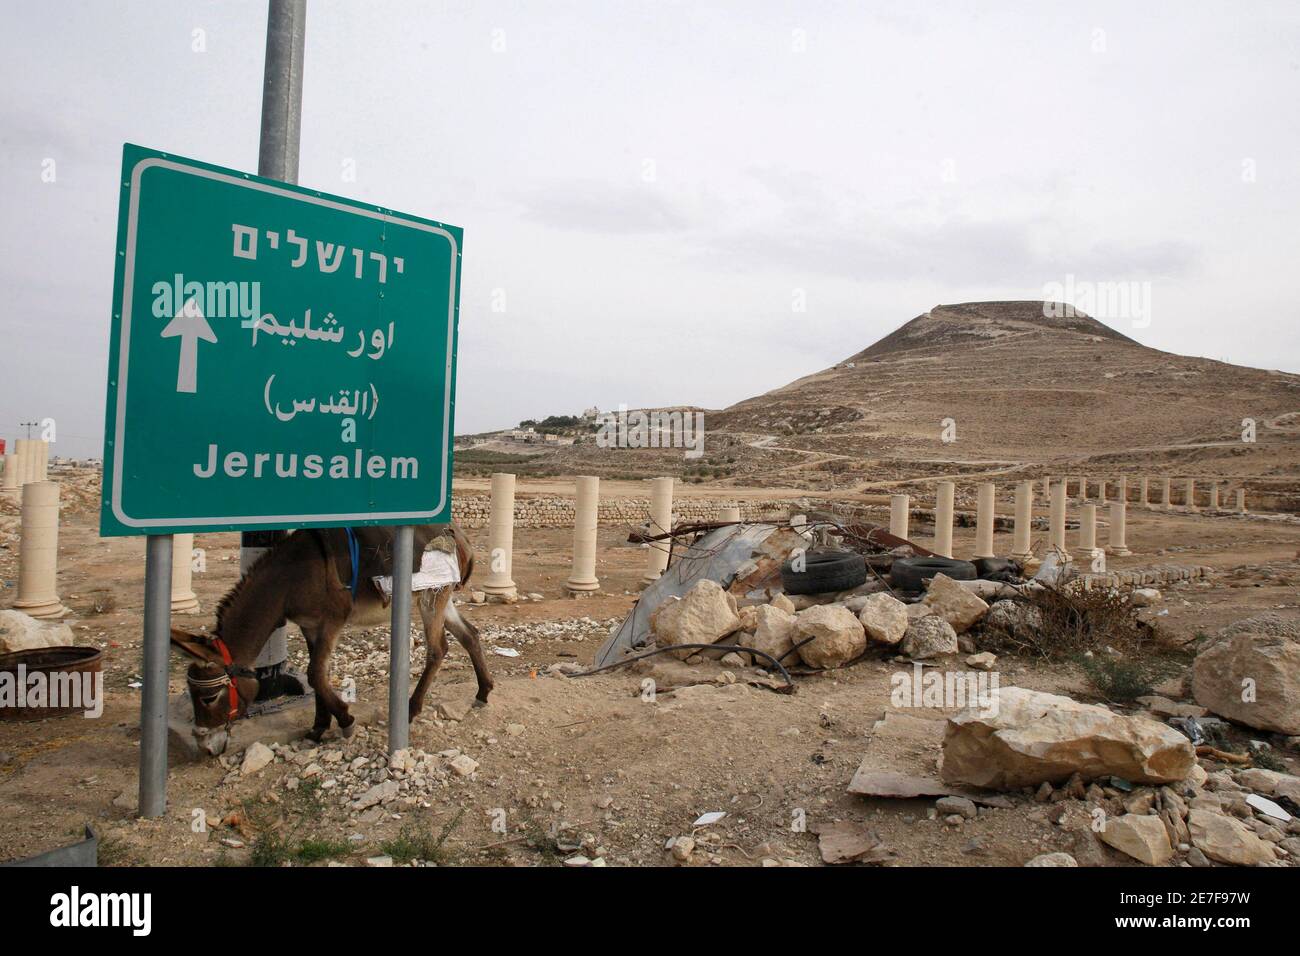 A donkey is seen near the site where Herod's fortress palace once stood, south of the West Bank town of Bethlehem November 19, 2008. An Israeli archaeologist said on Wednesday he had unearthed the 2,000-year-old remains of two sacrophagi in which a wife and daughter-in-law of the biblical King Herod had been interred. The findings announced by Ehud Netzer of Jerusalem's Hebrew University could cast new light on the lavish lifestyle of the Roman-era monarch also known as the 'King of the Jews.'    REUTERS/Baz Ratner (JERUSALEM) Stock Photo